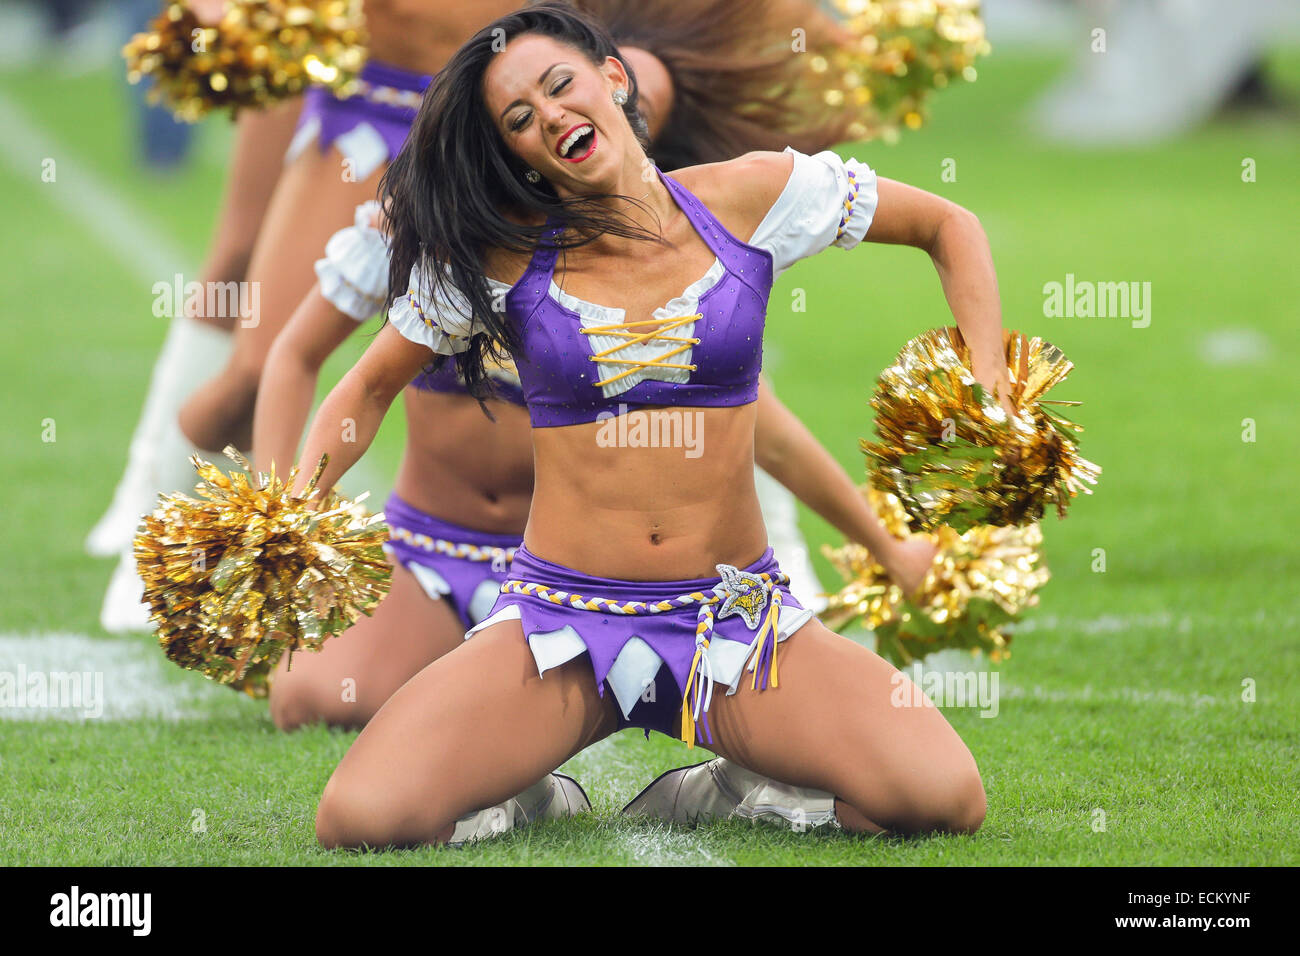 LONDON, GREAT BRITAIN - SEPTEMBER 29 The cheerleaders of the Minnesota Vikings perform at a NFL International game on September Stock Photo